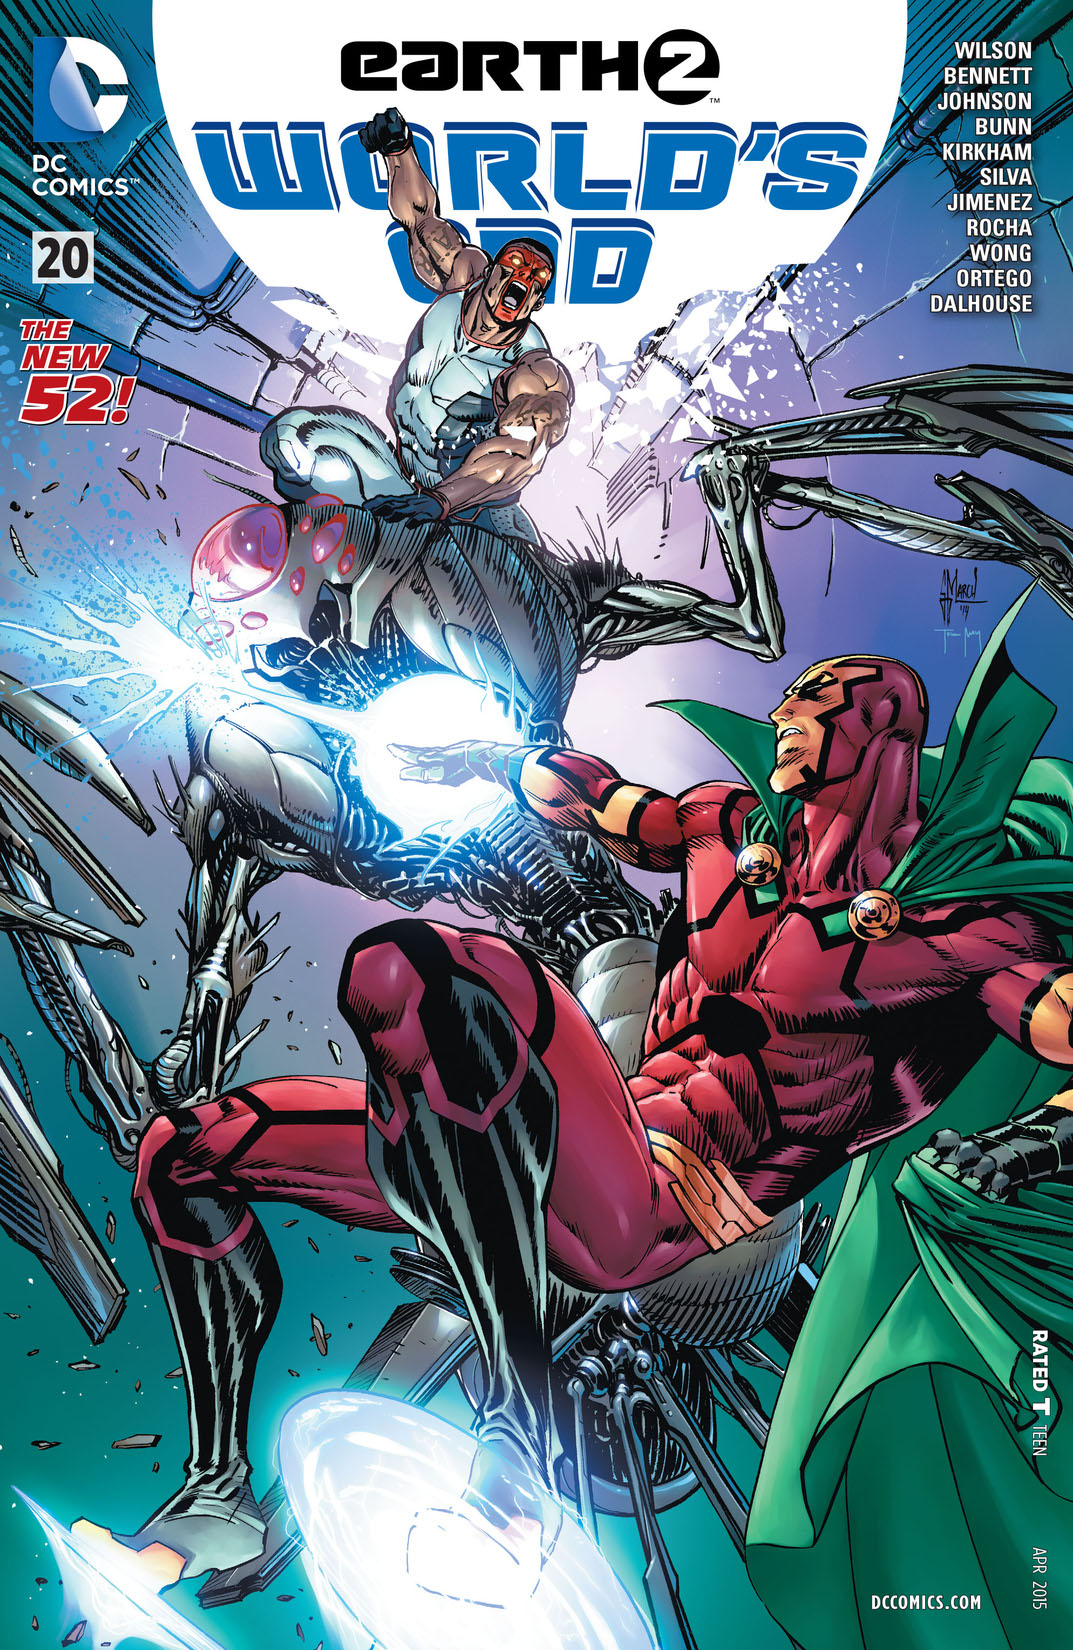 Earth 2: World's End #20 preview images